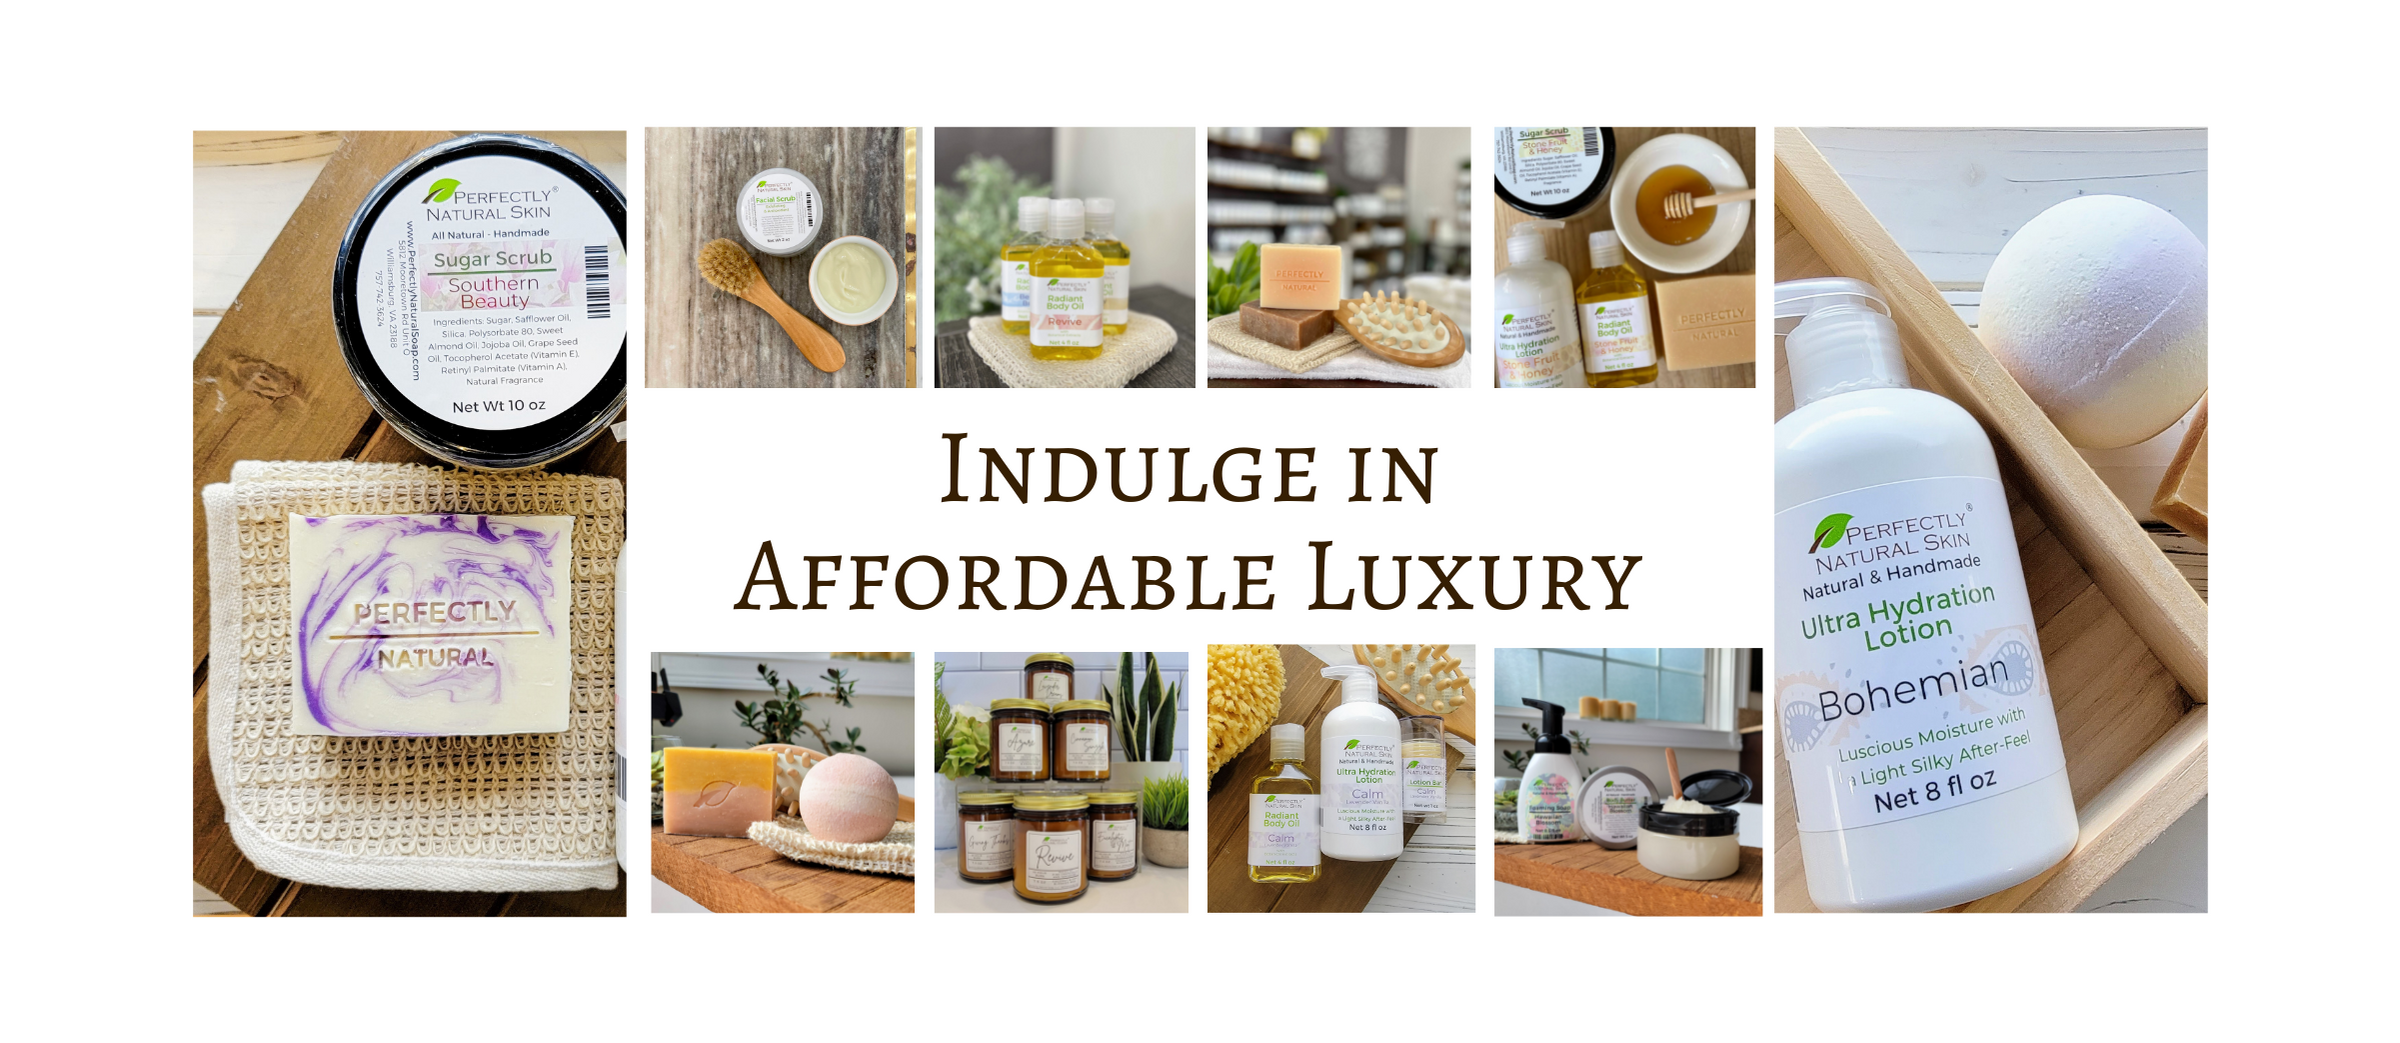 image showing an array of perfectly natural products with the text stating indulge in affordable luxury